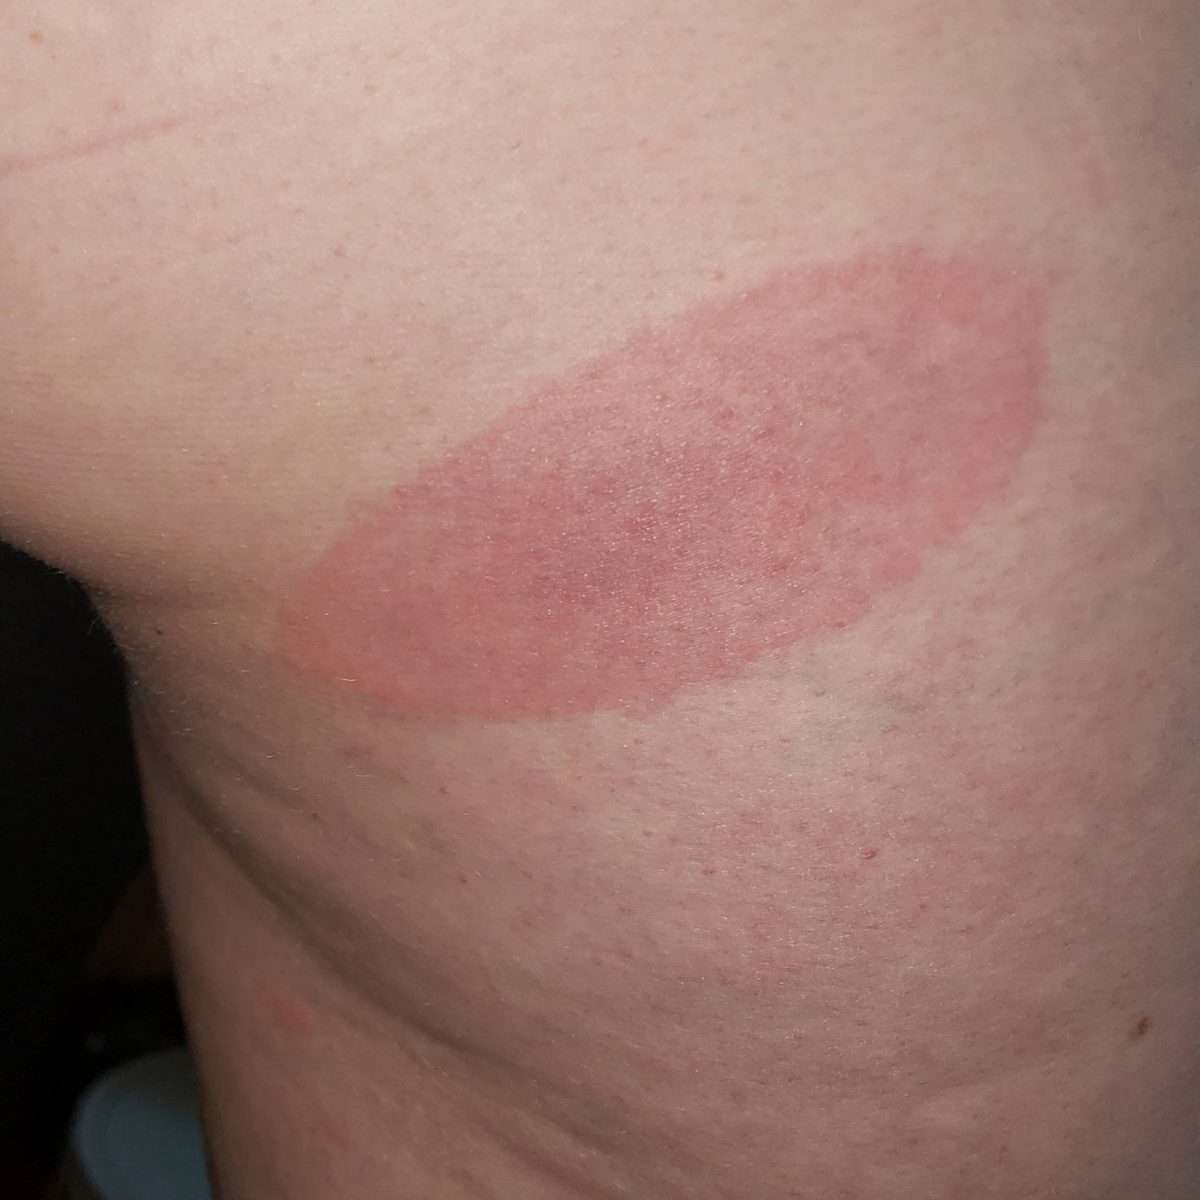 Told I have Lyme Disease today at Med Express. Got this rash after 5 ...